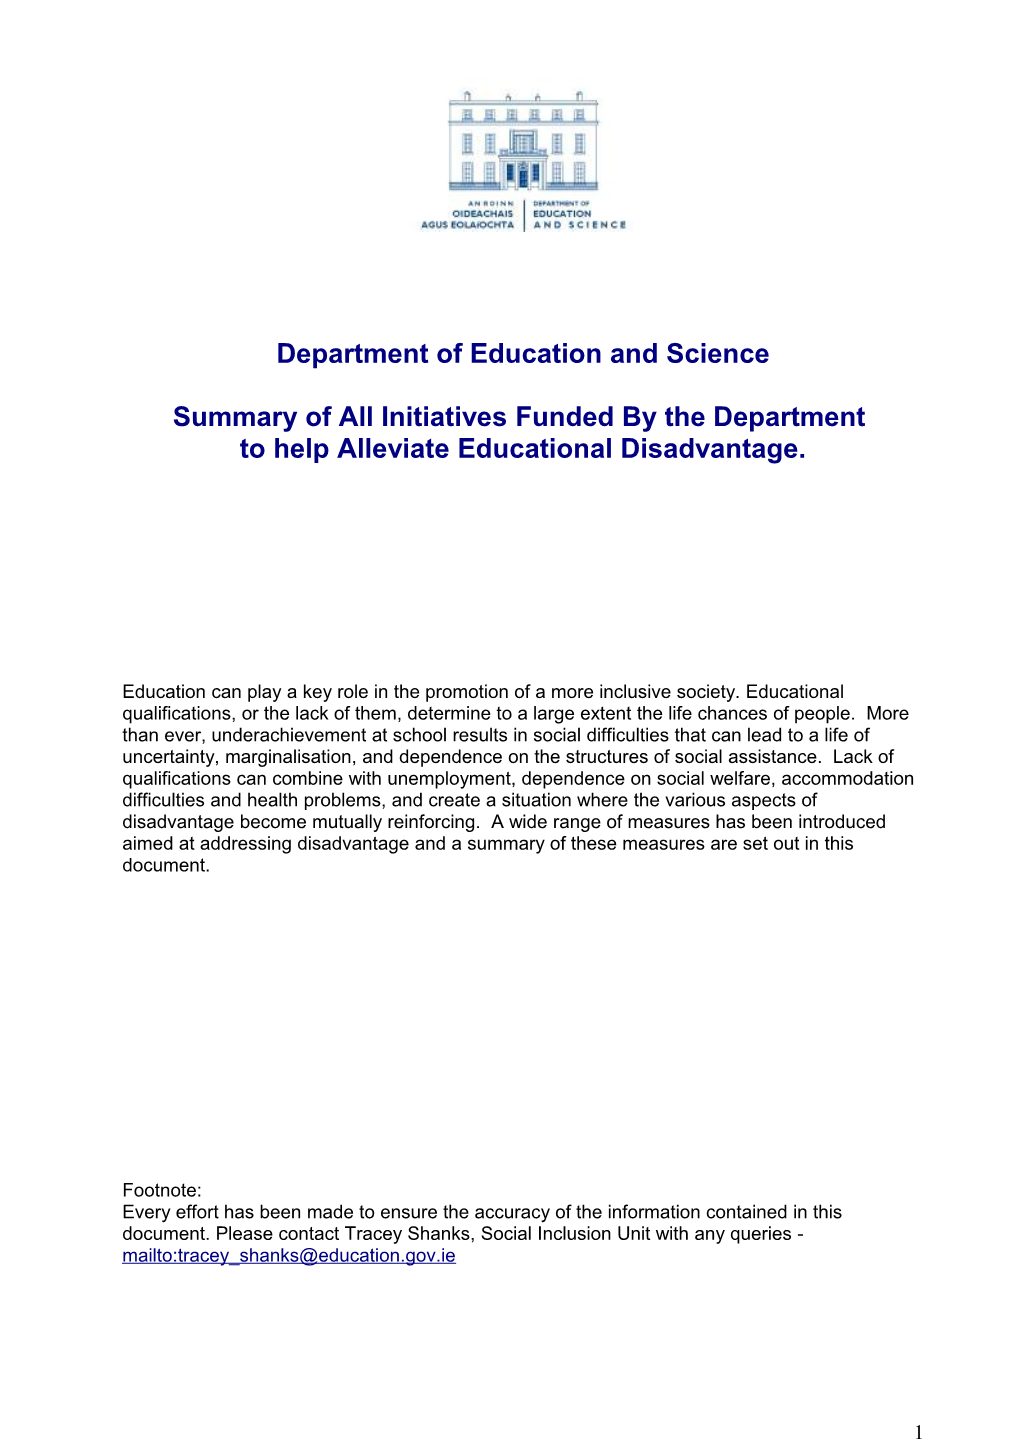 Summary of All Initiatives Funded by the Department of Education and Science to Help Alleviate